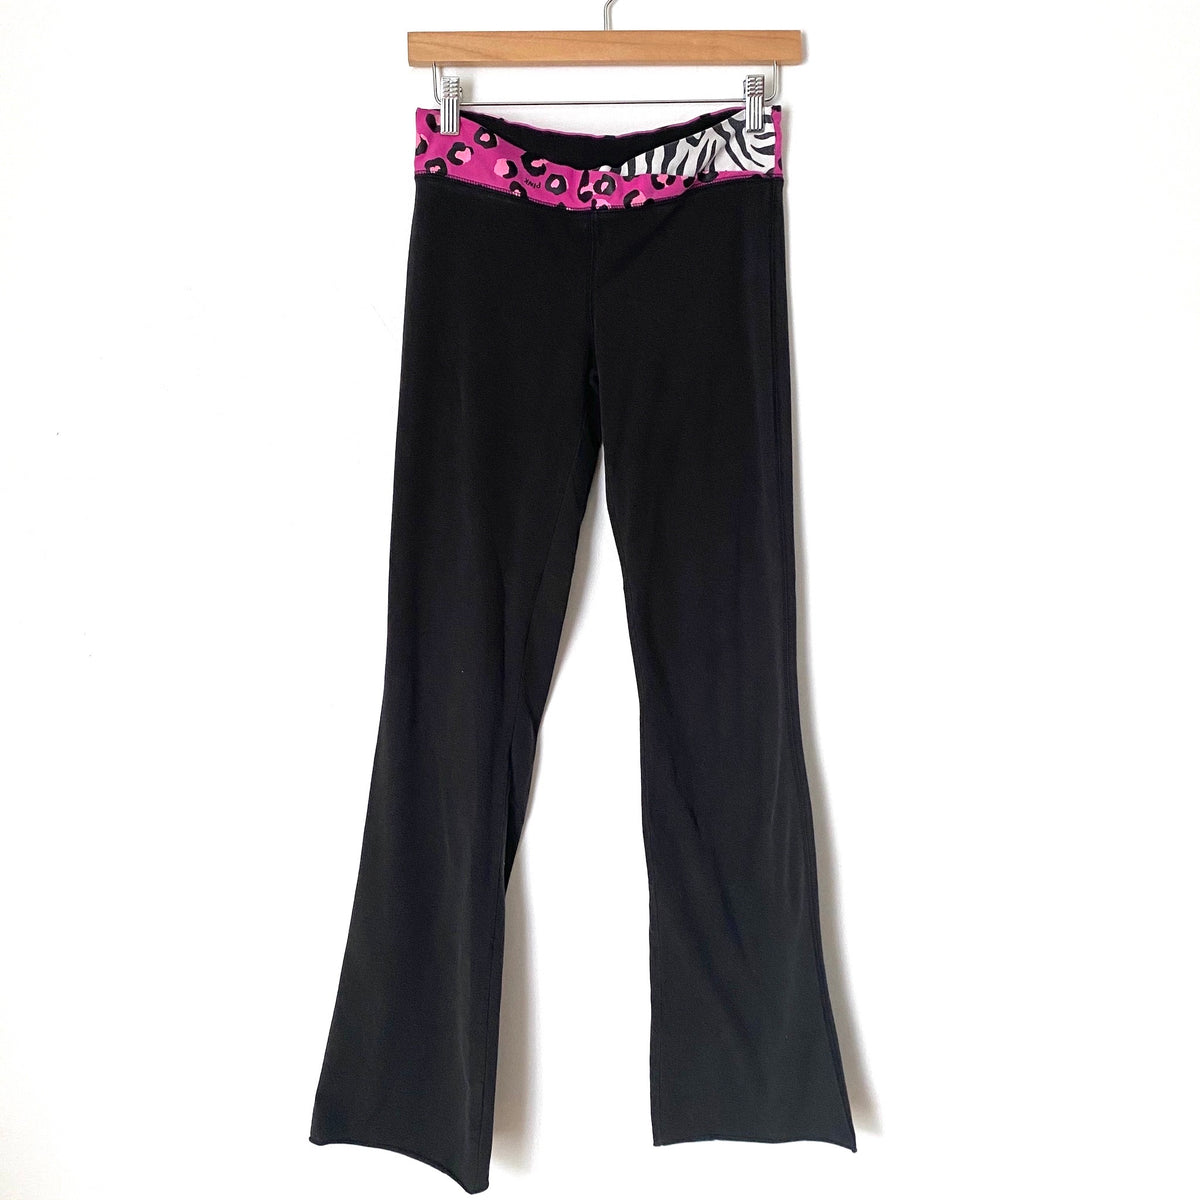 Pink Victoria's Secret Black Yoga Pants- Size S (Inseam 31) – The Saved  Collection